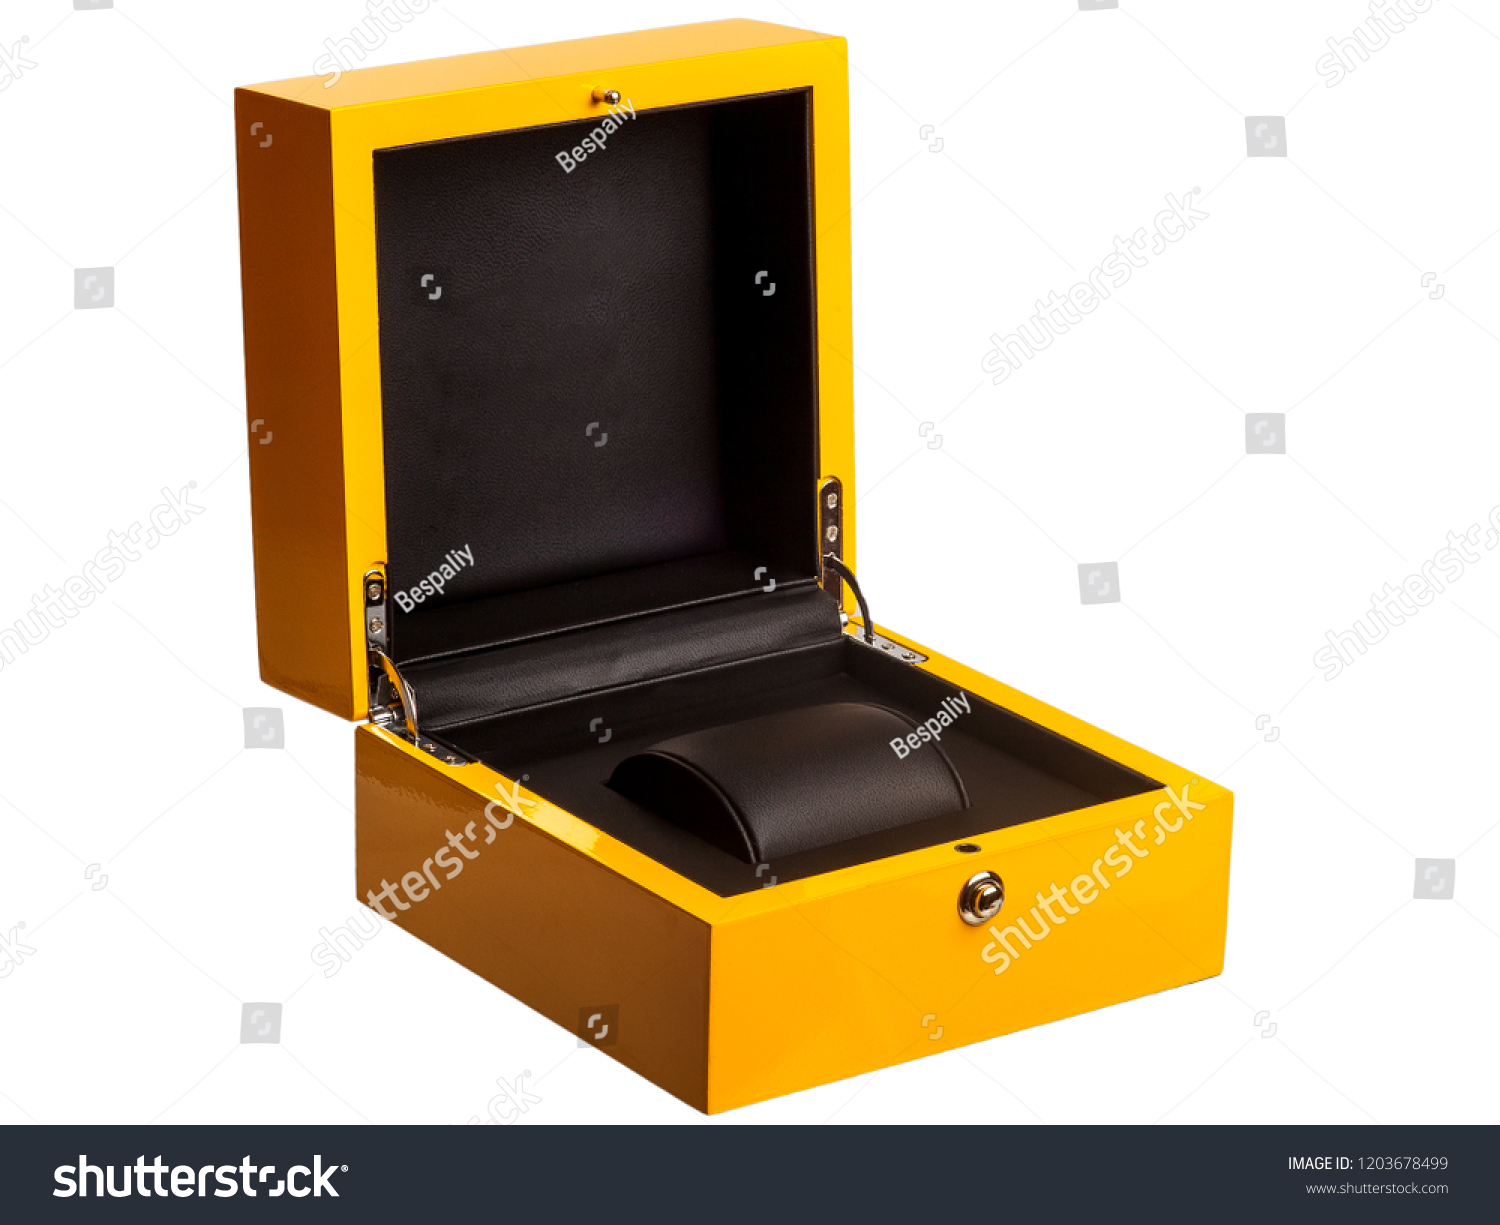 Download Yellow Box Storing Watches Open Wooden Objects Stock Image 1203678499 Yellowimages Mockups